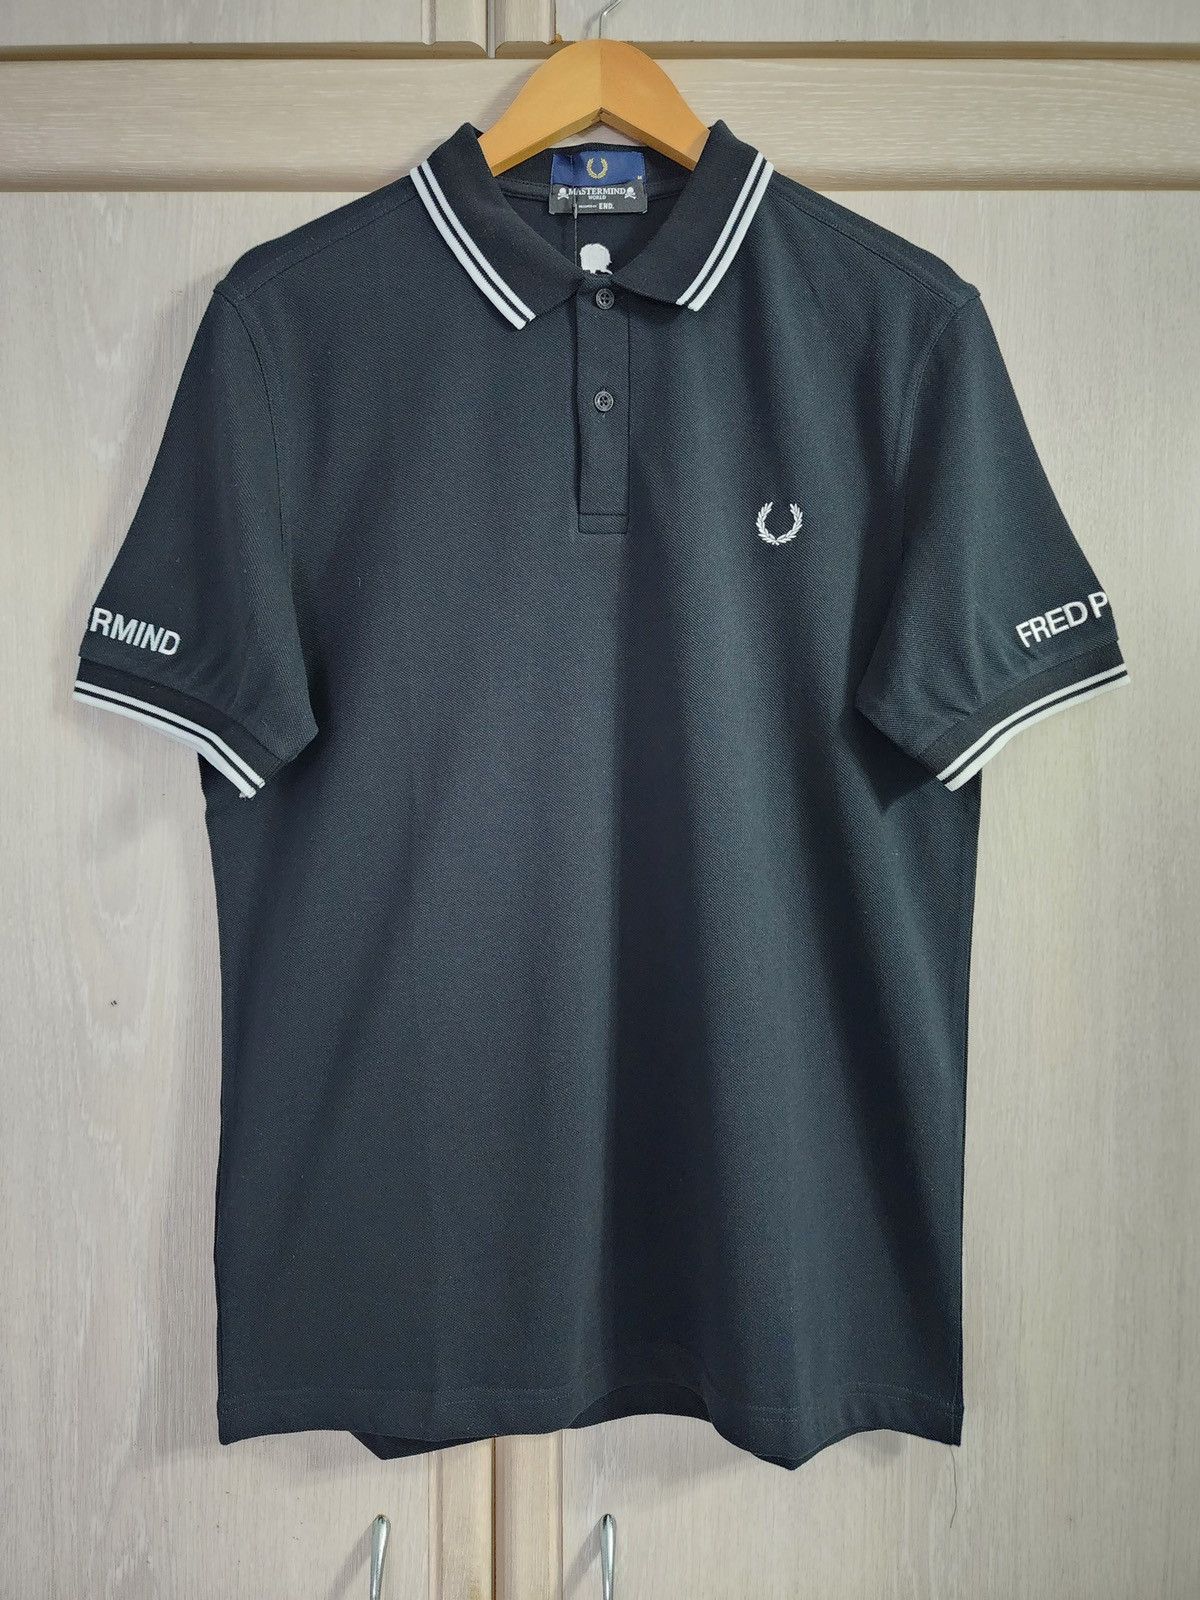 Fred Perry END. x Mastermind World x Fred Perry Polo T-shirt | Grailed